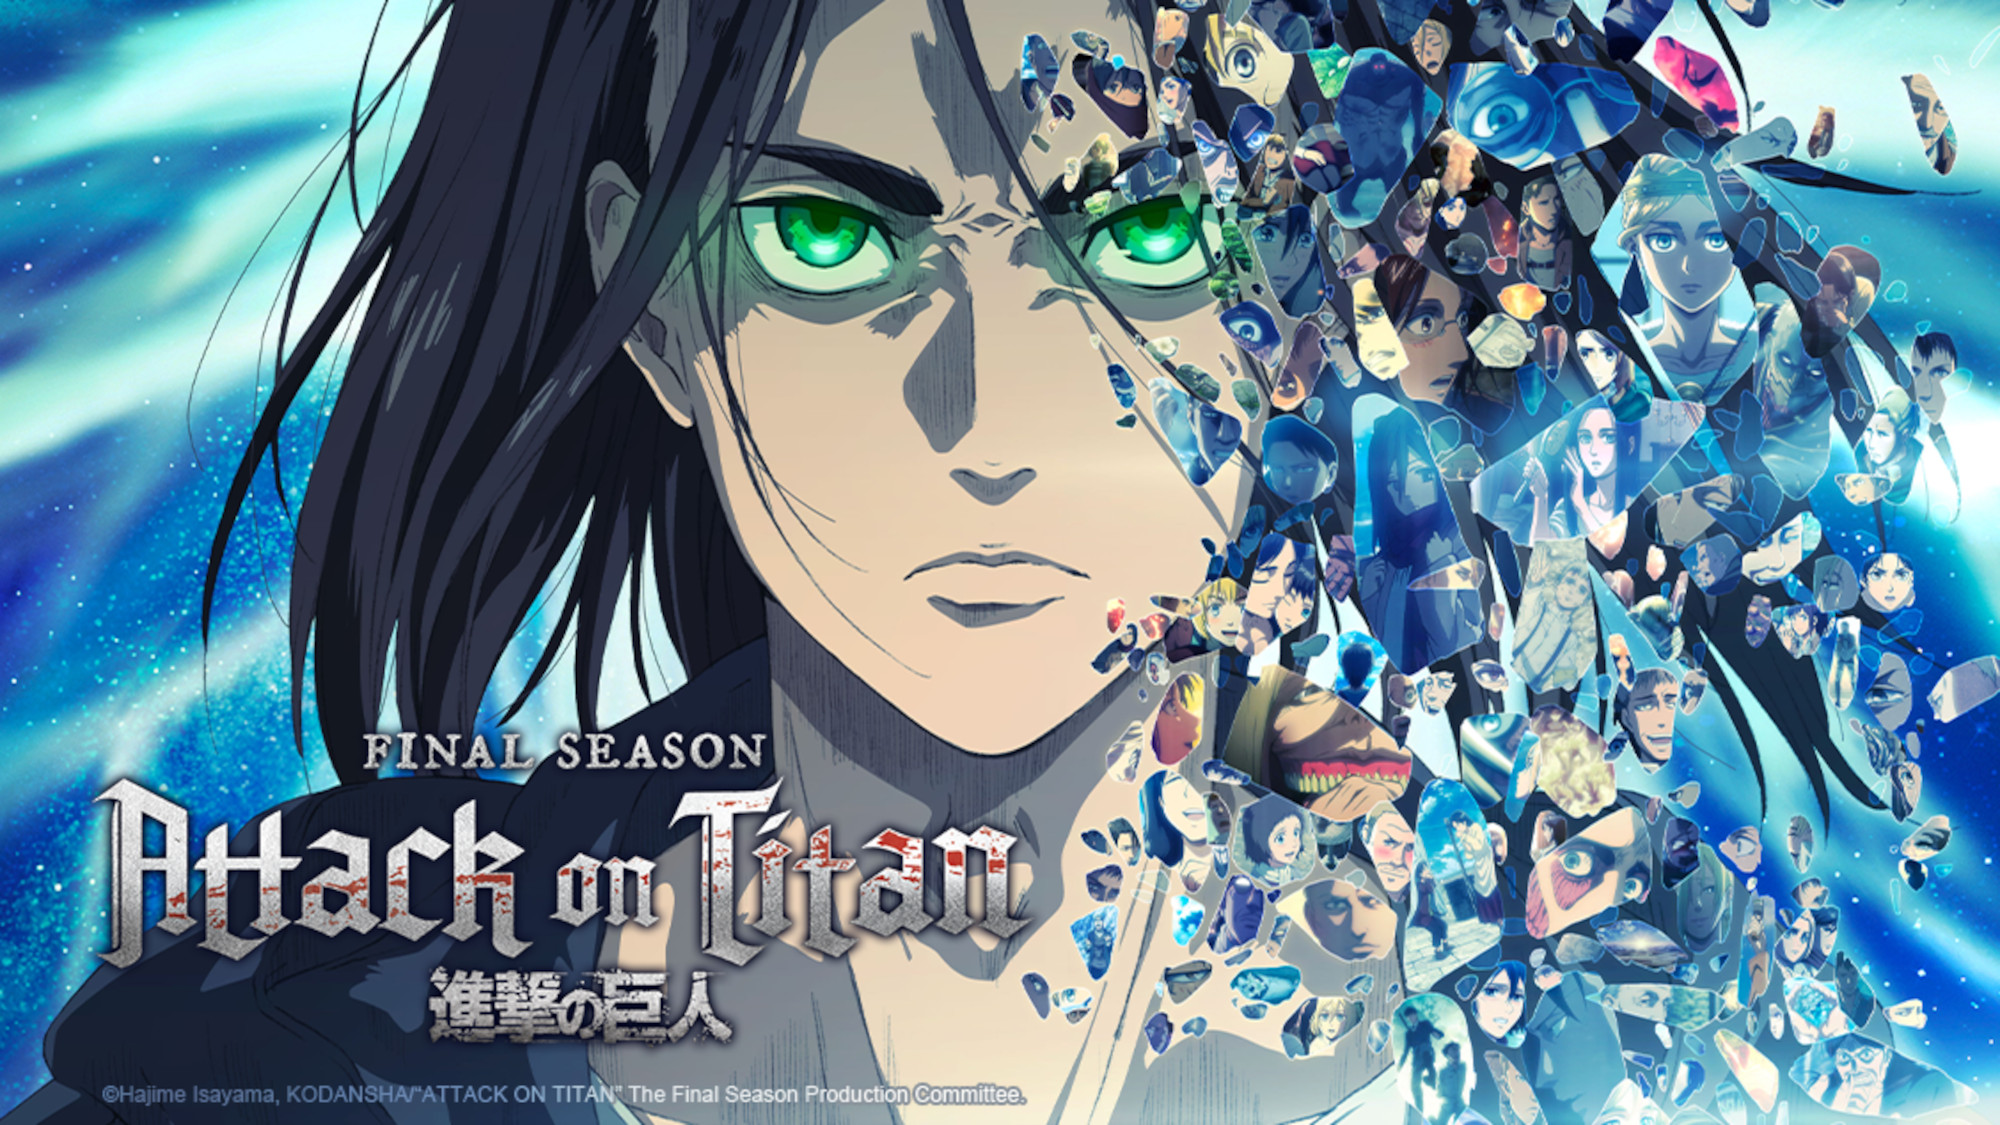 Key art for 'Attack on Titan' Season 4 Part 2. It shows Eren's face, half of which is made up of memory fragments featuring scenes from the anime.